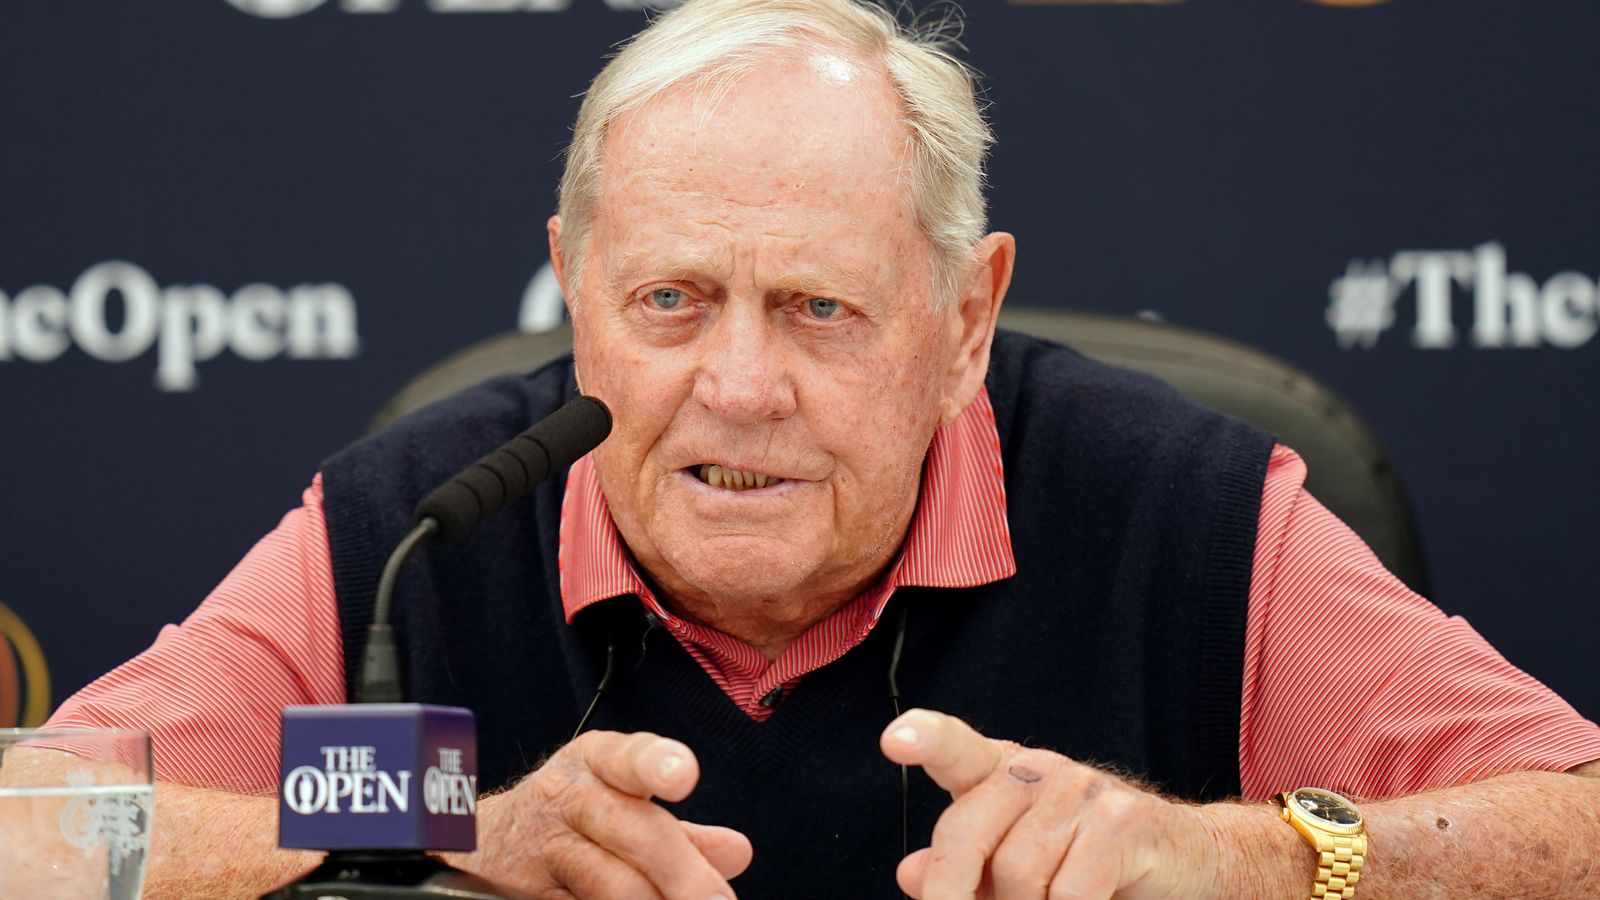 The 150th Open: Jack Nicklaus unconcerned by possibility of record scoring at St Andrews